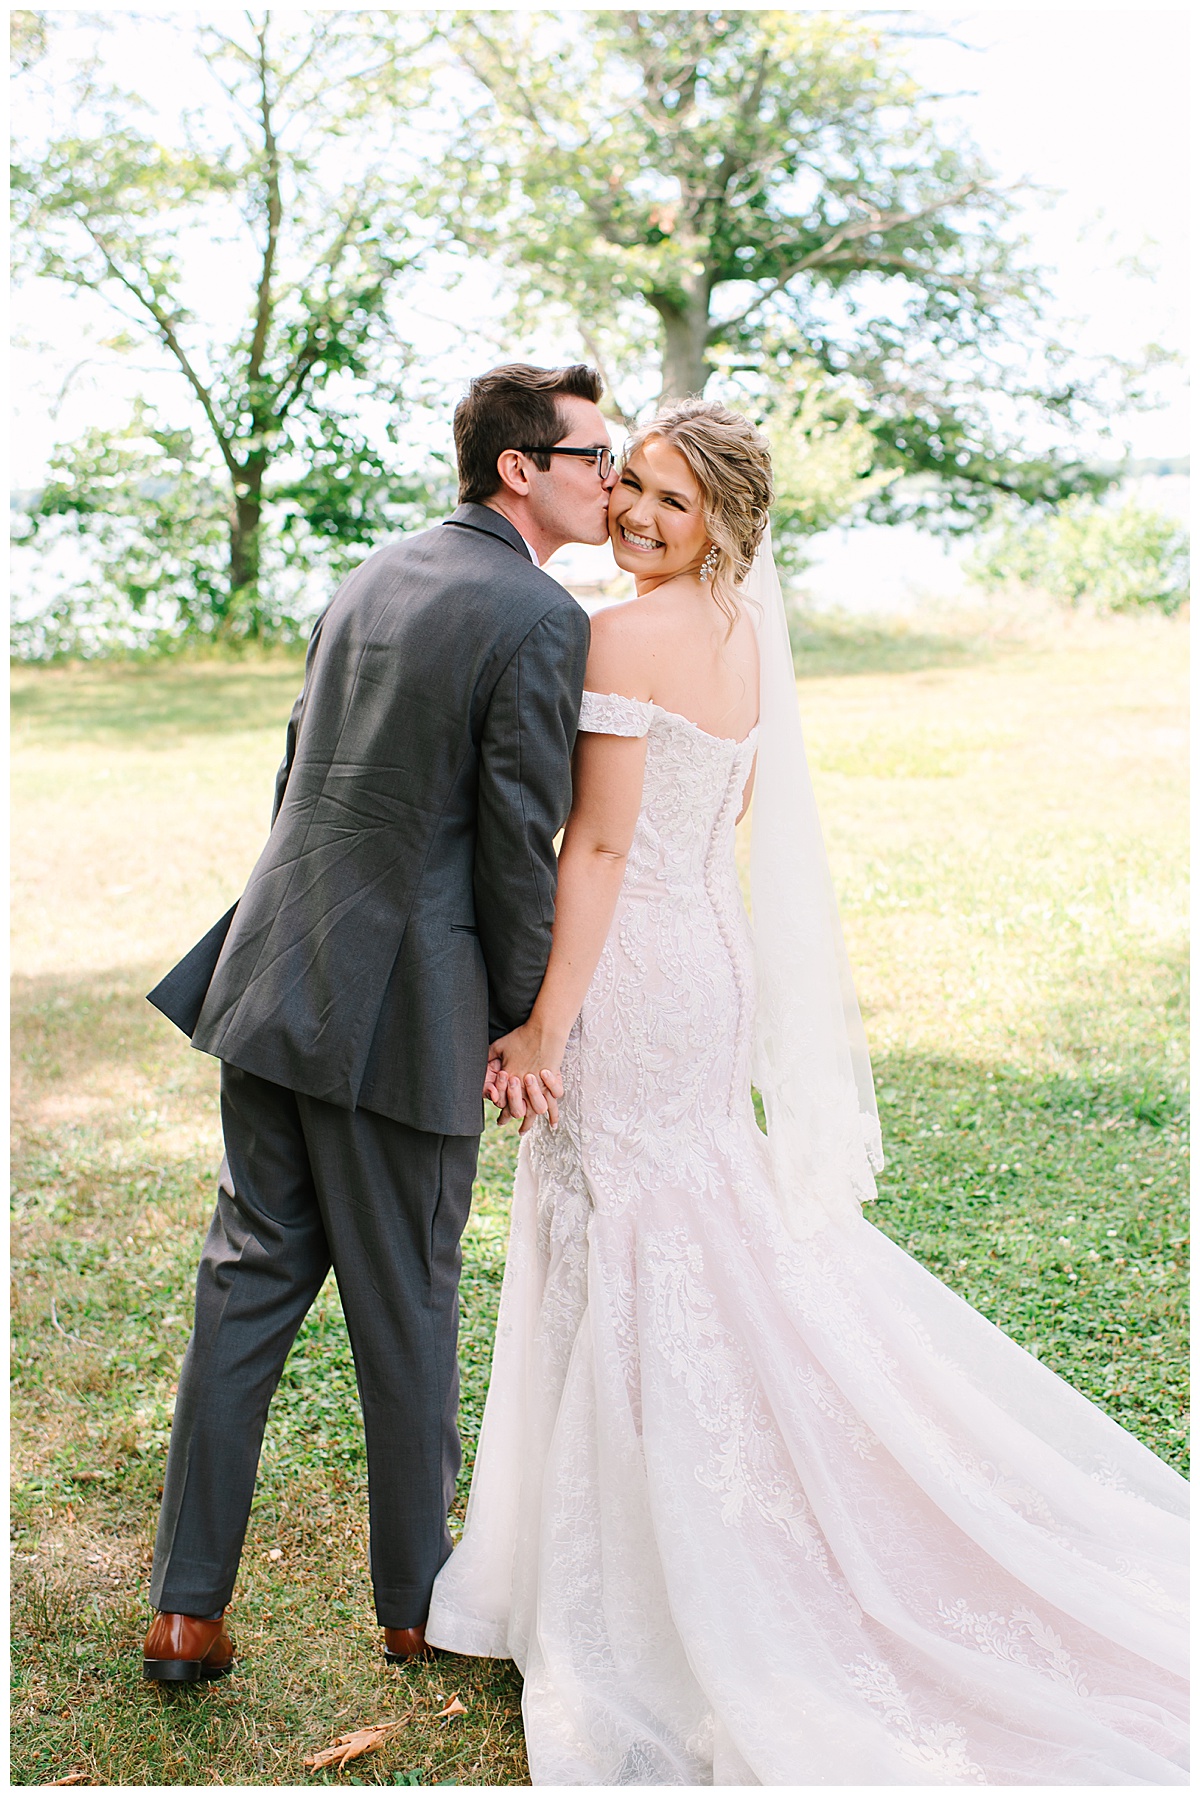 Cheek kiss by Brittany Emerson Photography